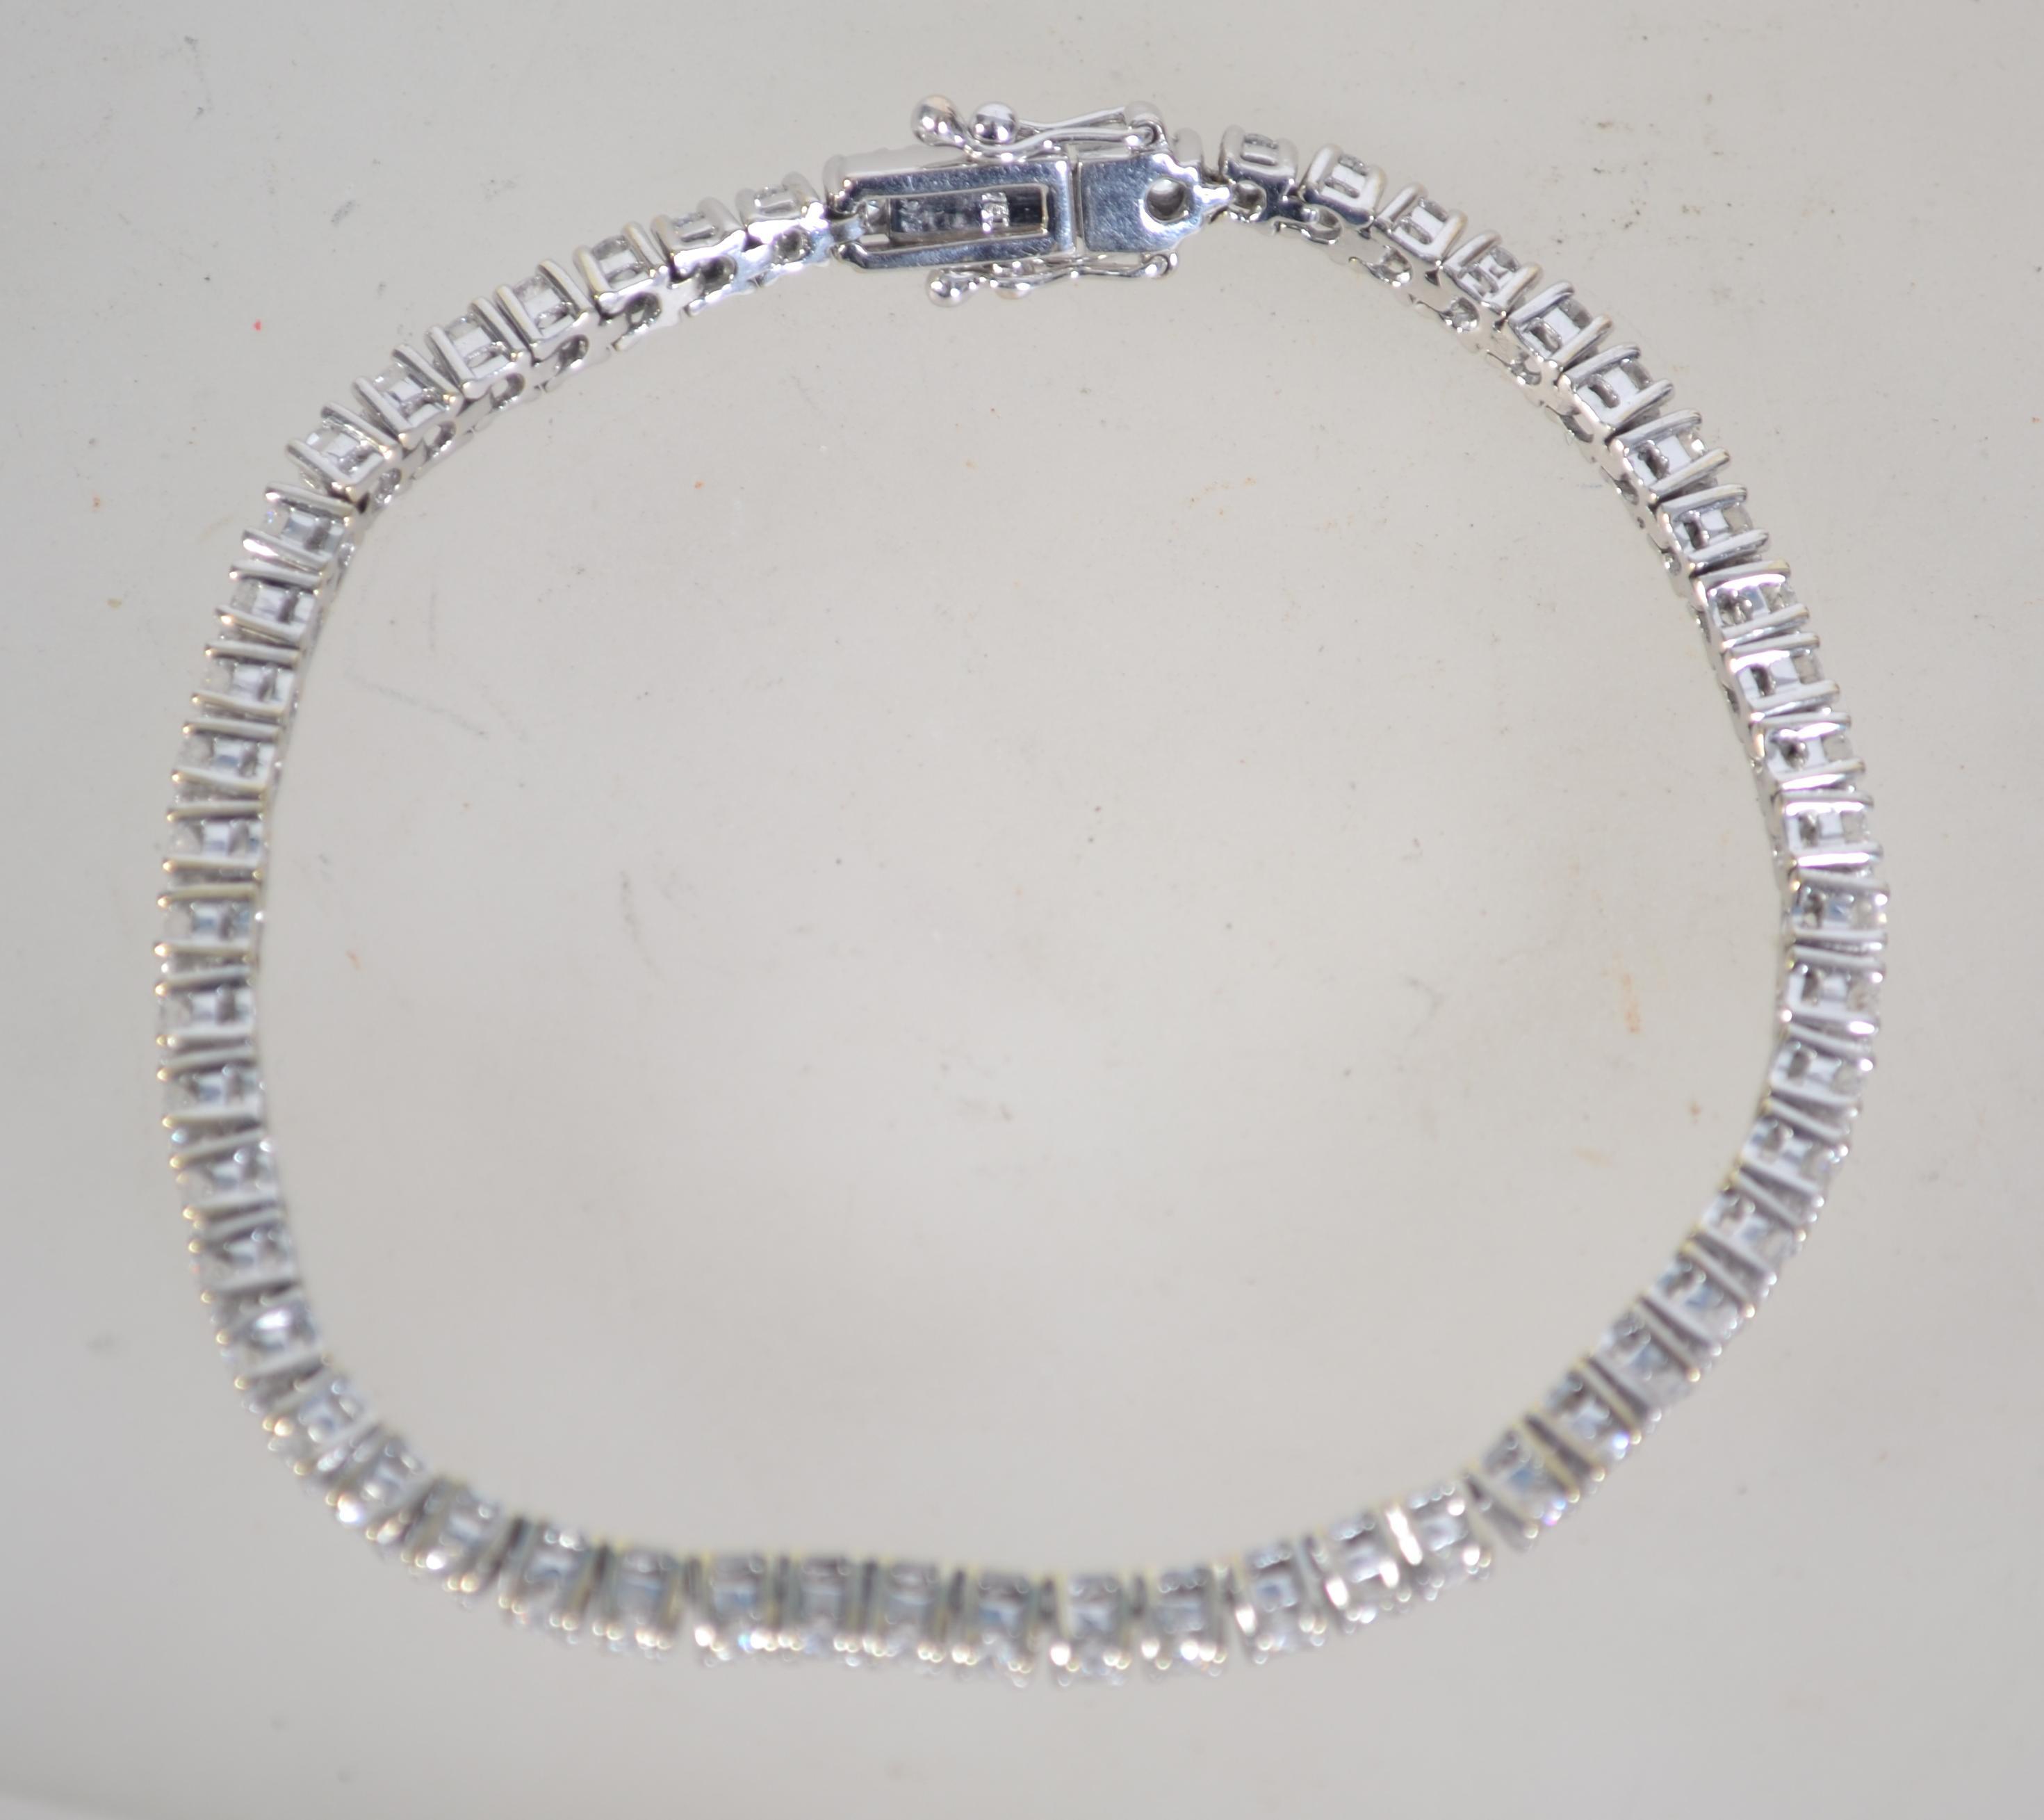 A hallmarked 18ct white gold and diamond tennis bracelet set with a total of 3cts diamonds. - Image 7 of 8